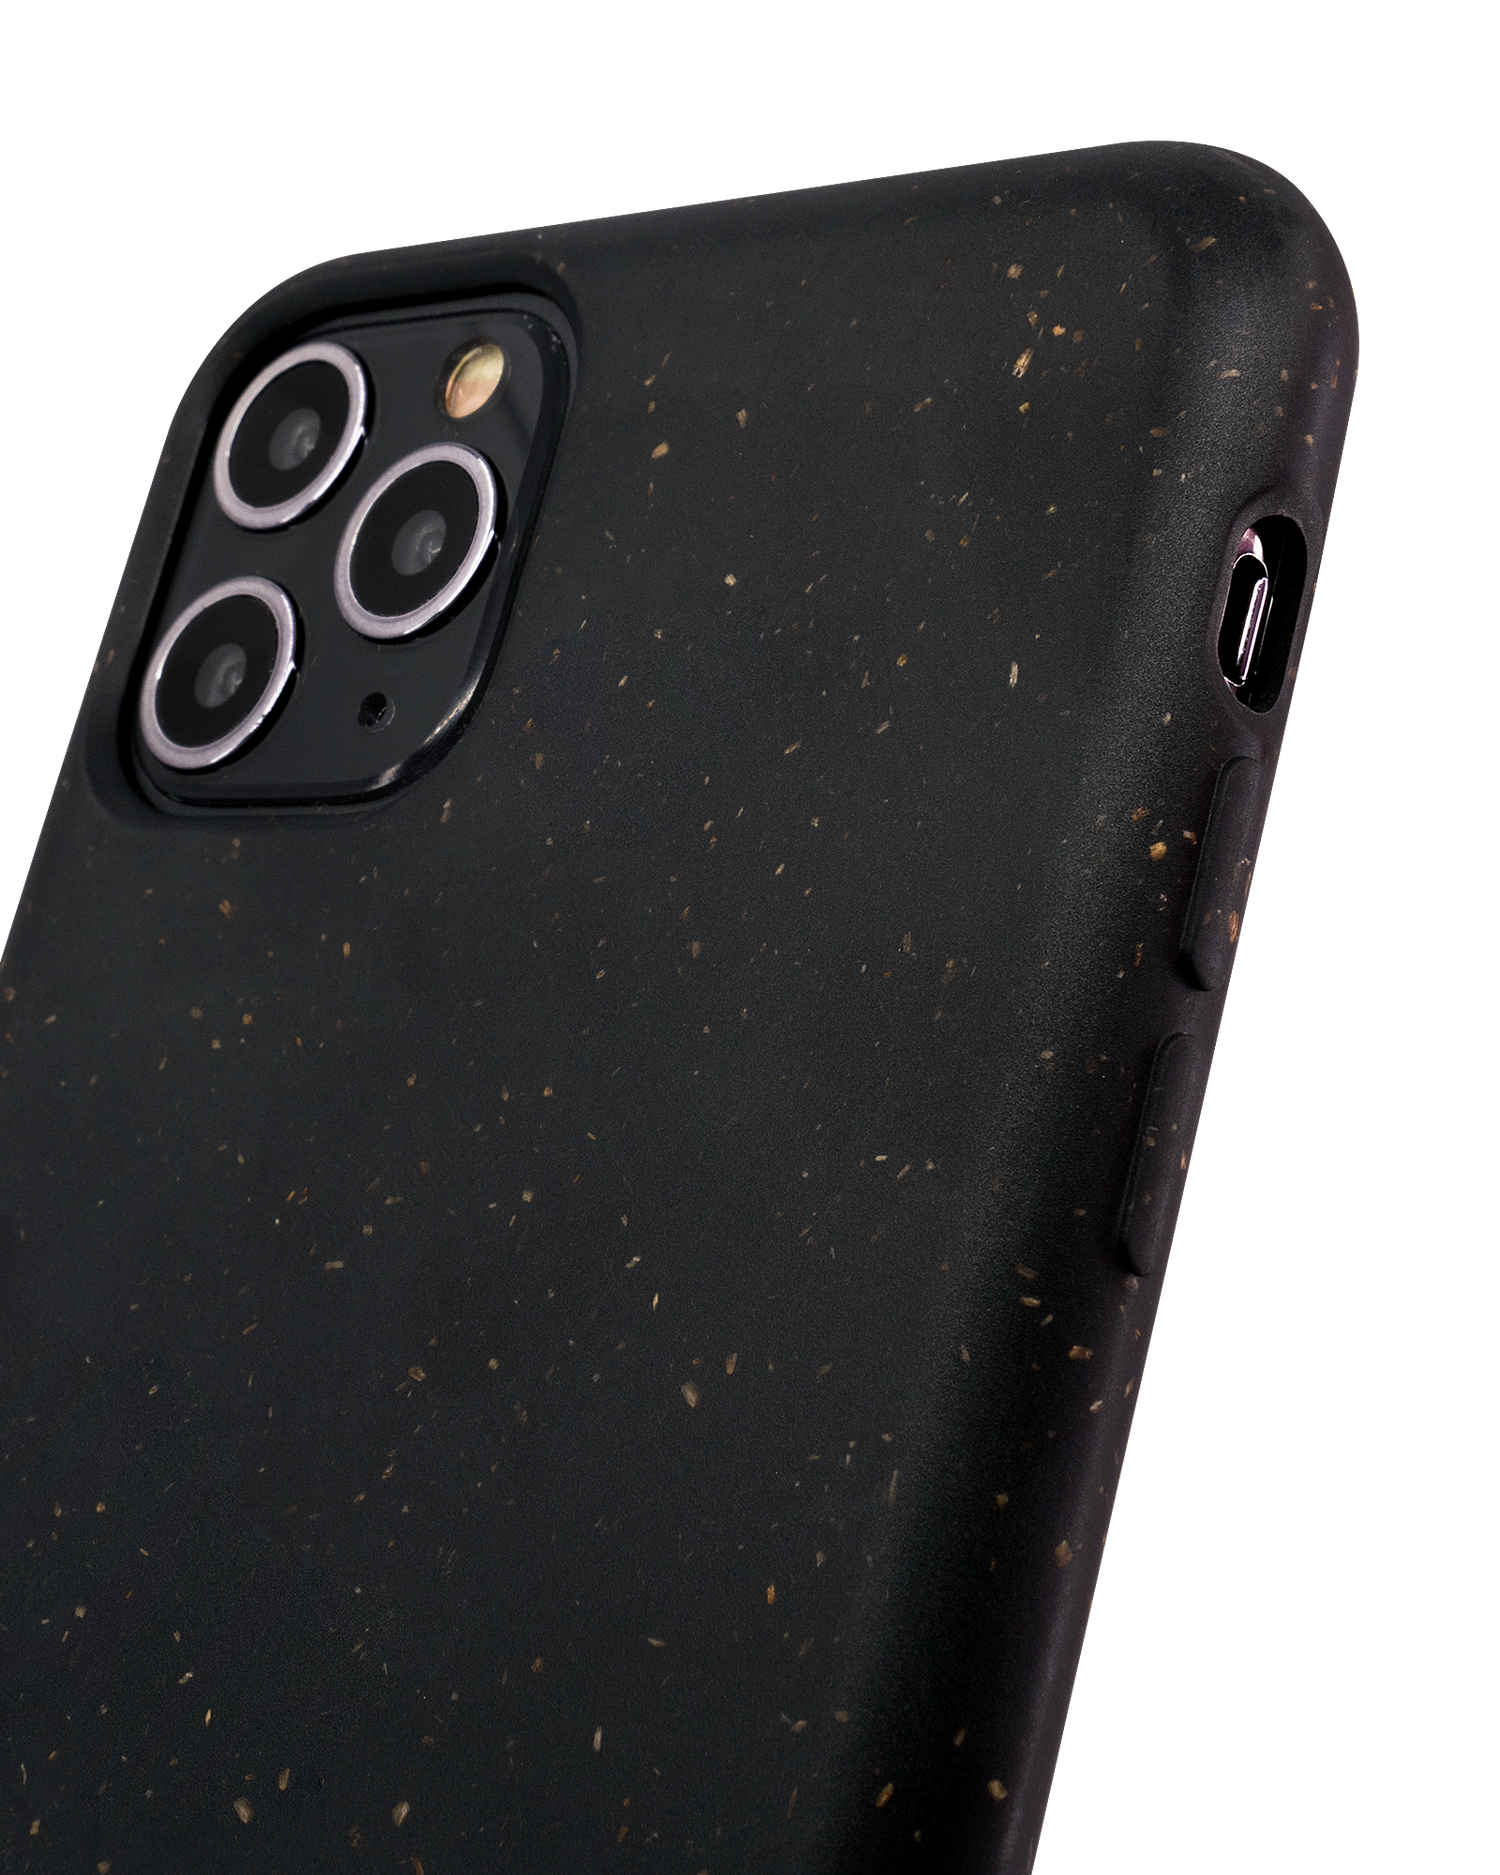 Black Eco-Friendly Phone Case for Apple iPhone 11 Pro Max: Details inside